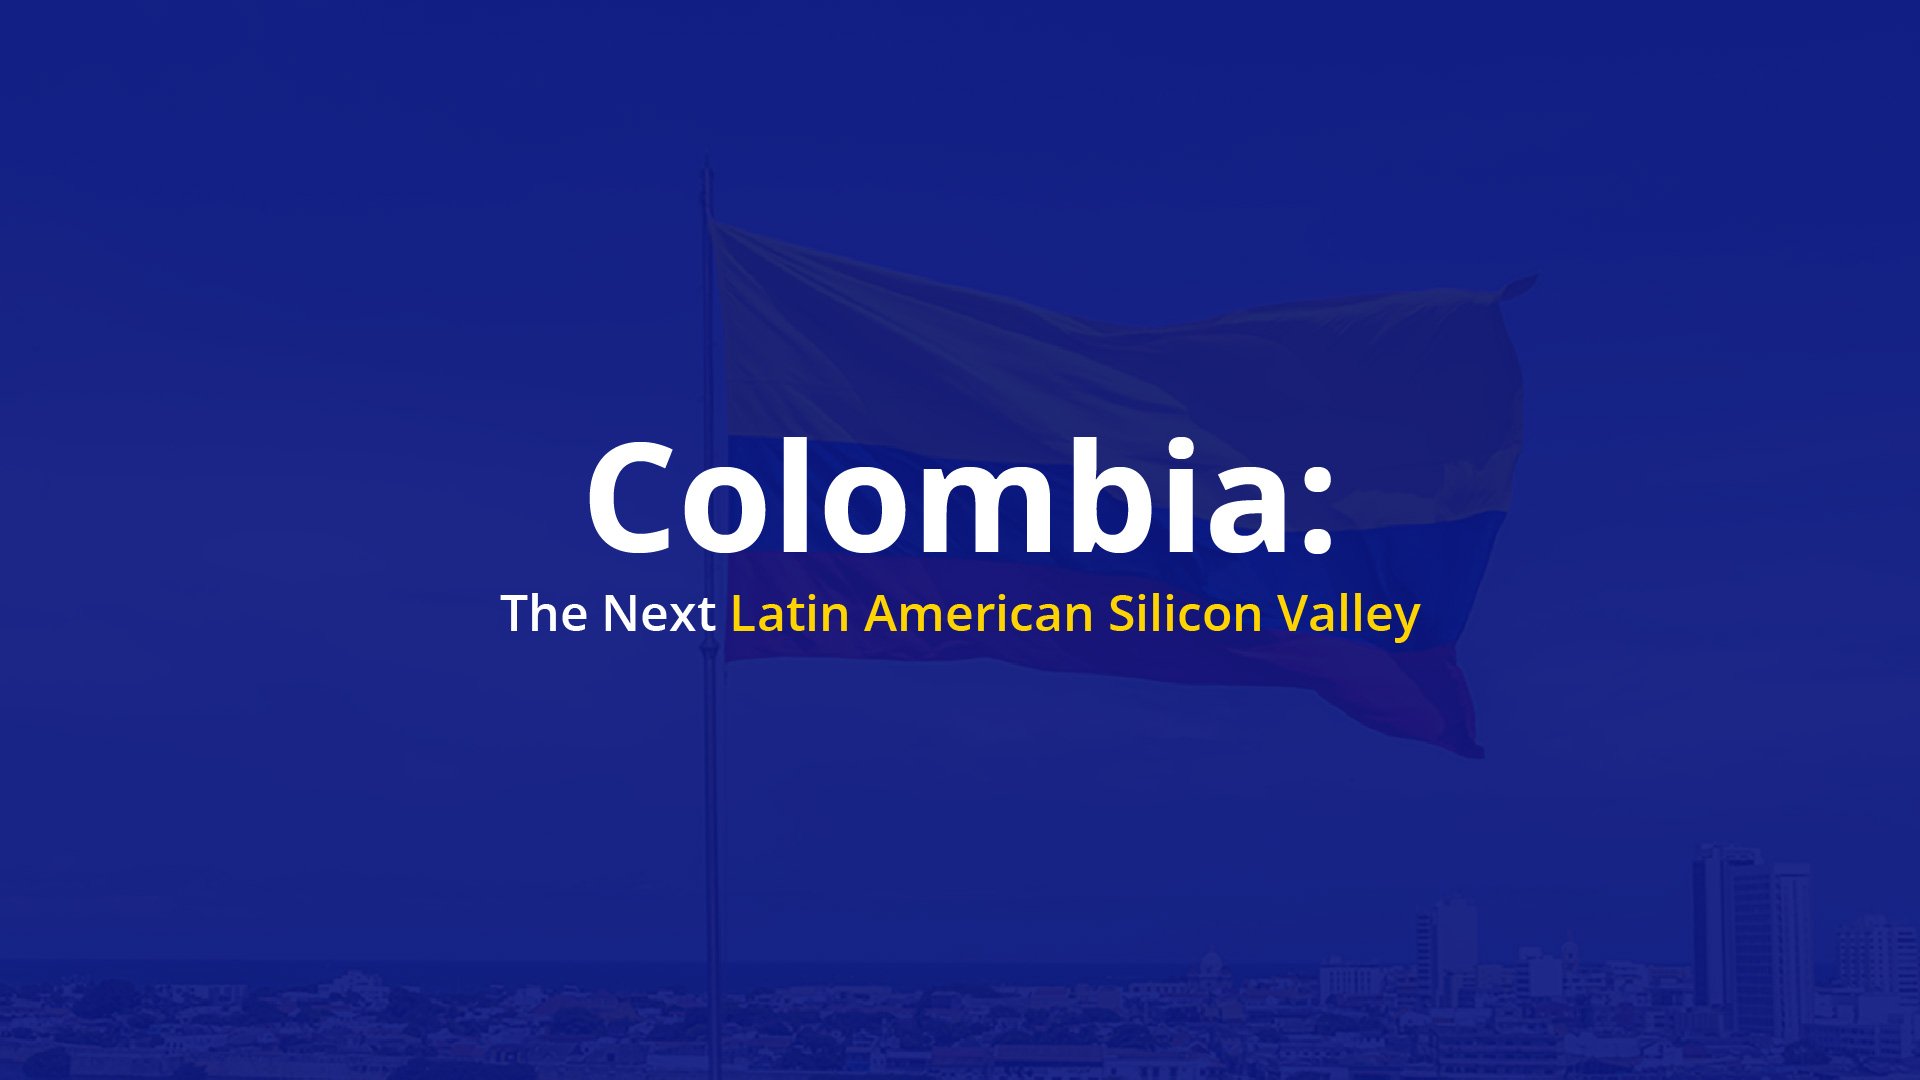 Colombia: The Next Latin American Silicon Valley.